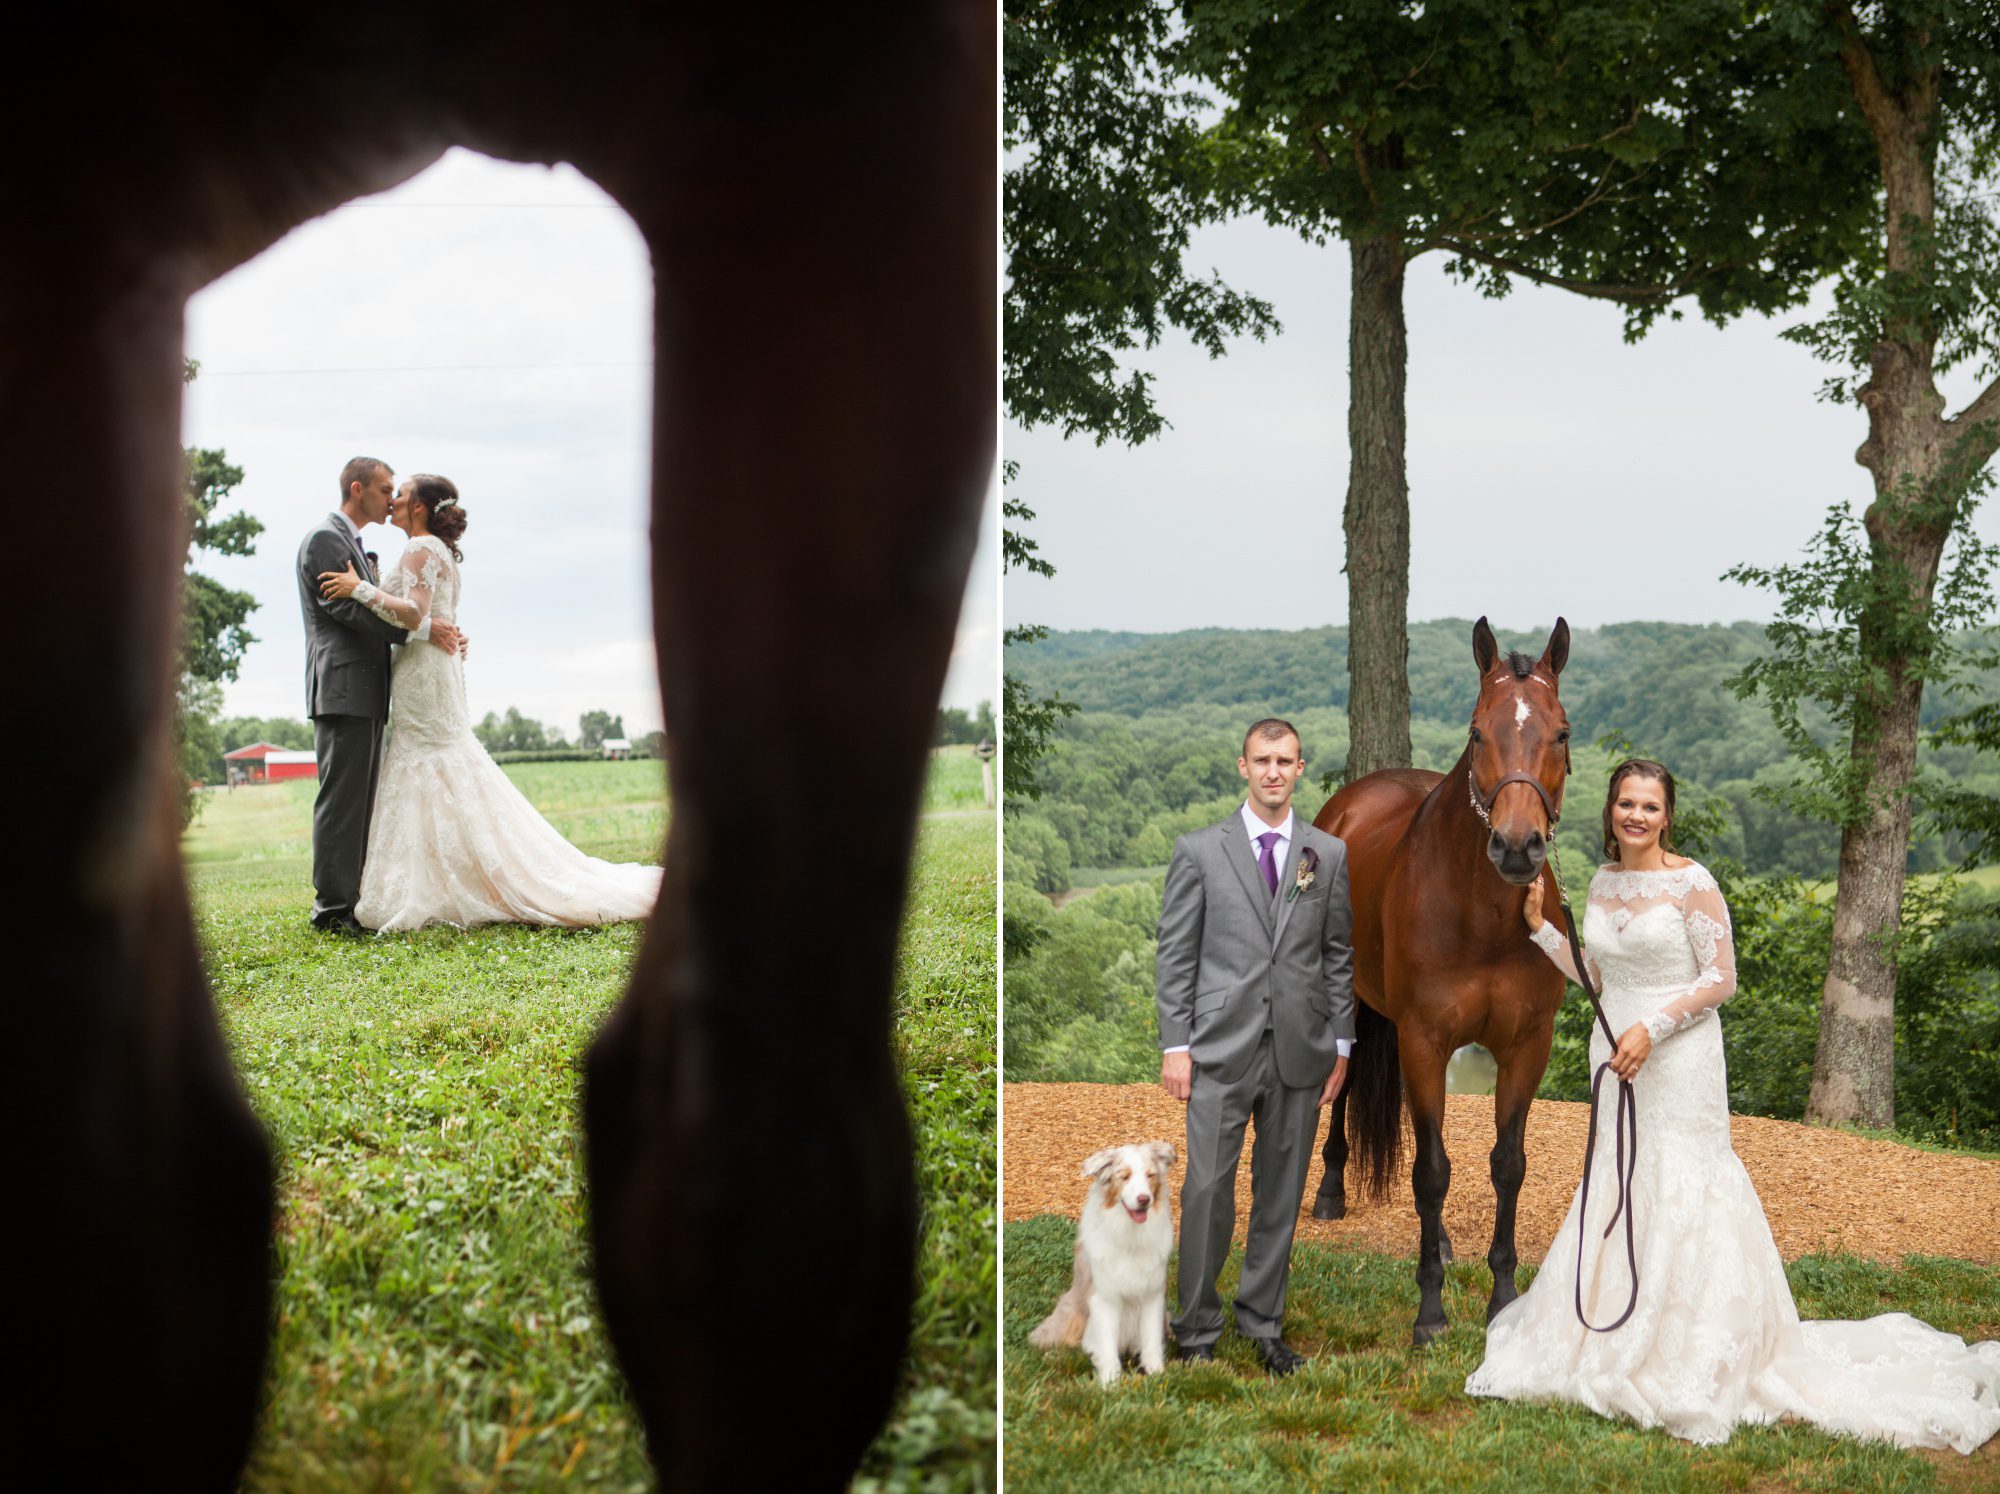 Bride and groom portrait with horse at ceremony site overlooking river before summer wedding at Owen Farm in Chapmansboro, TN. Photography by Krista Lee Photography. 